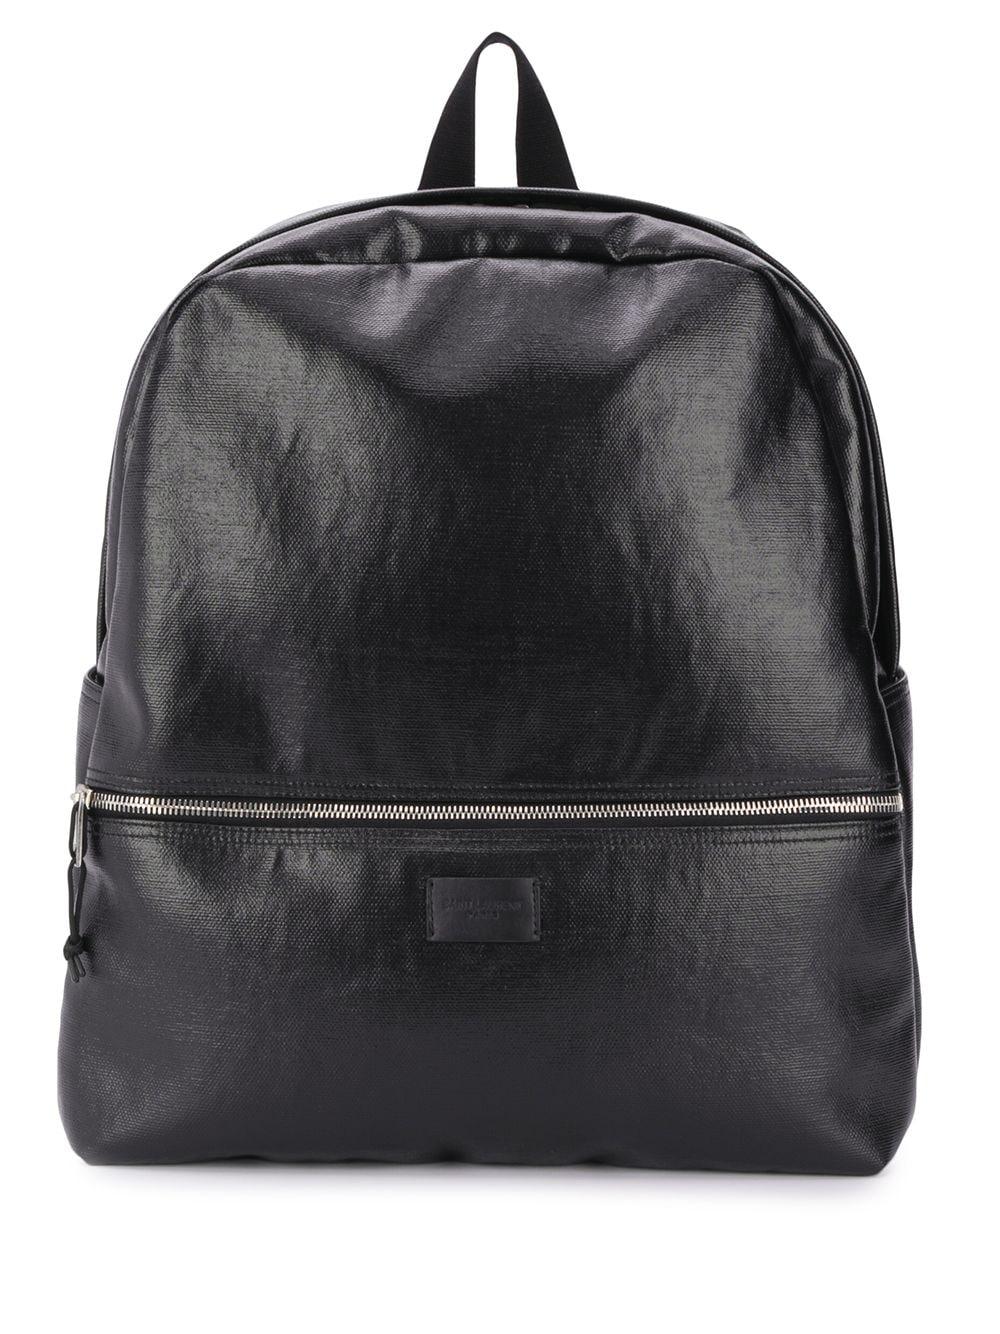 Saint Laurent Leather Ysl Nuxx Backpack in Black - Lyst